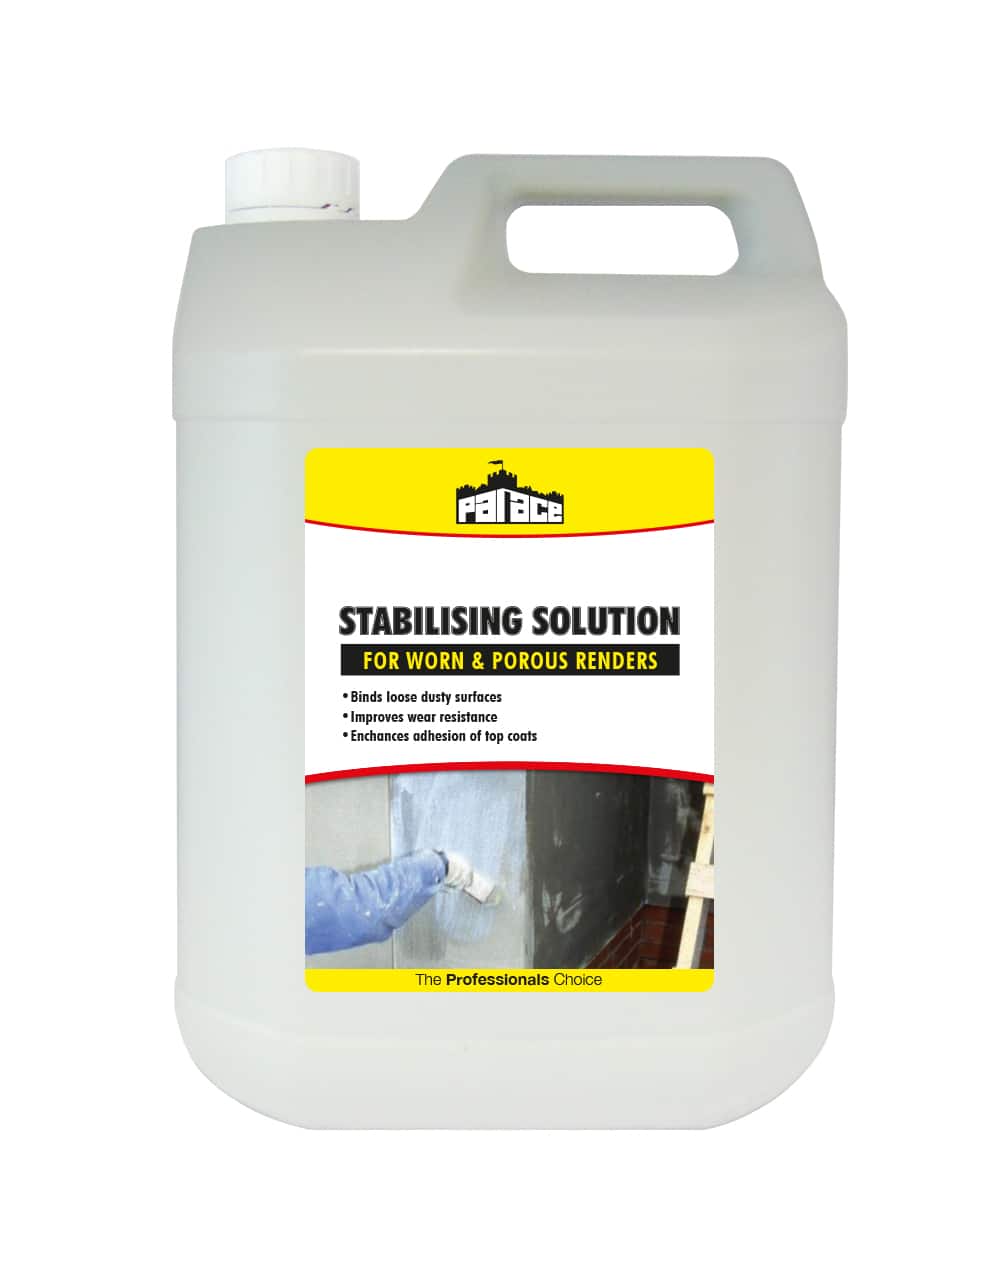 Palace Stabilising Solution